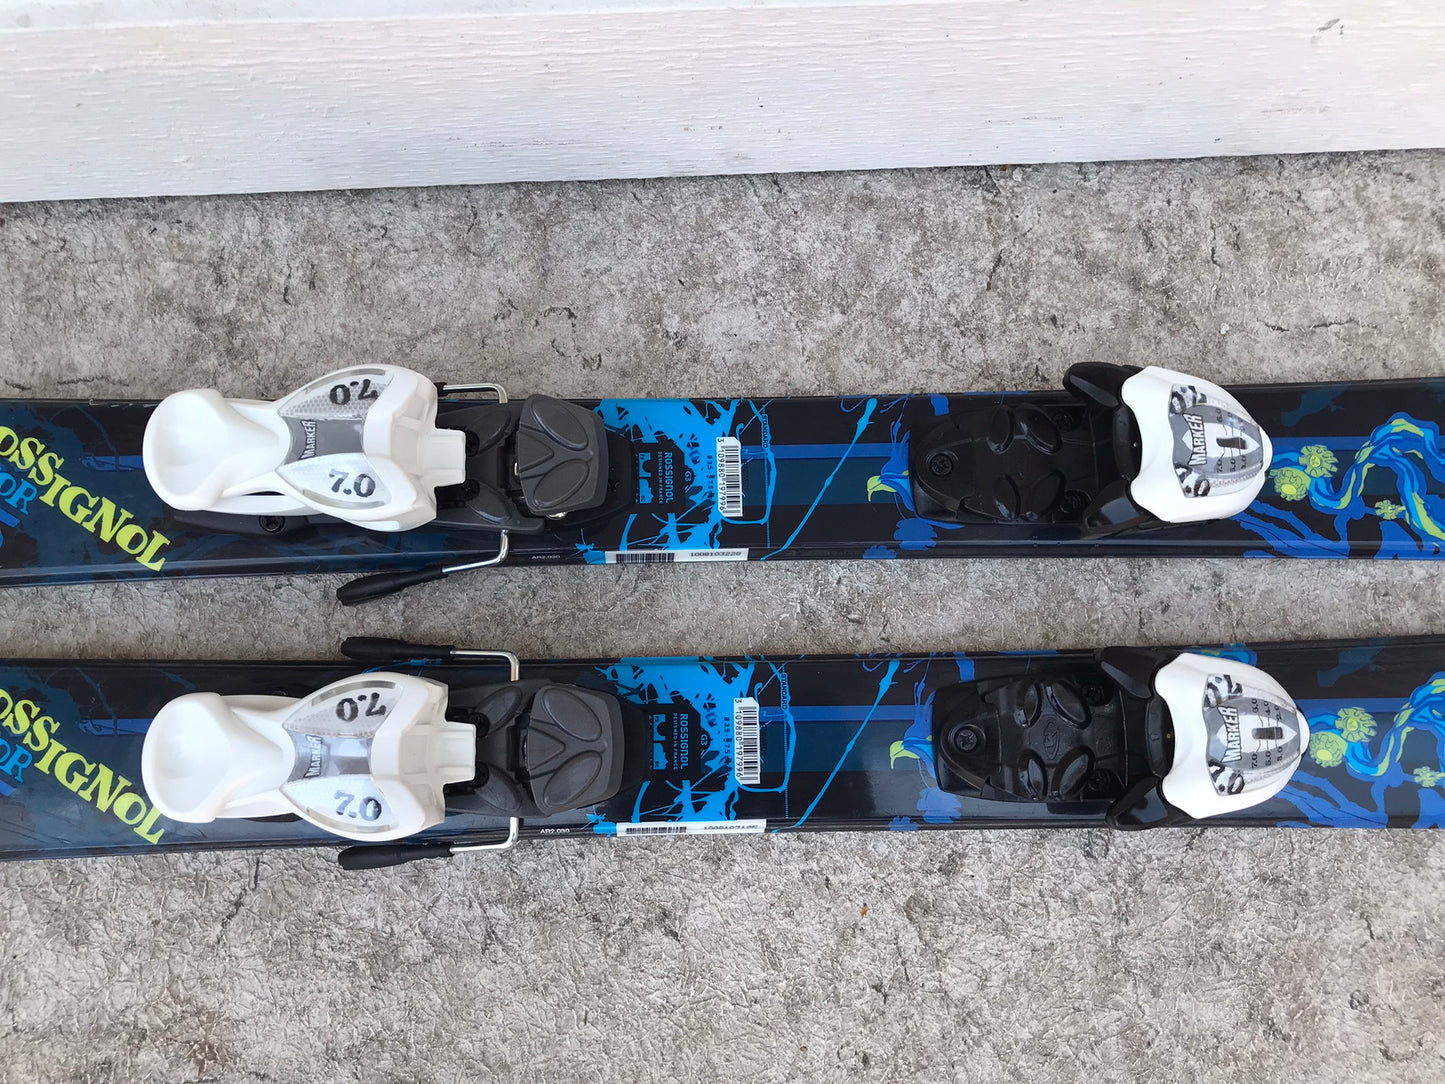 Ski 135 Rossignol Twin Tip Parabolic With Bindings Blue Lime Cartoons Outstanding Quality